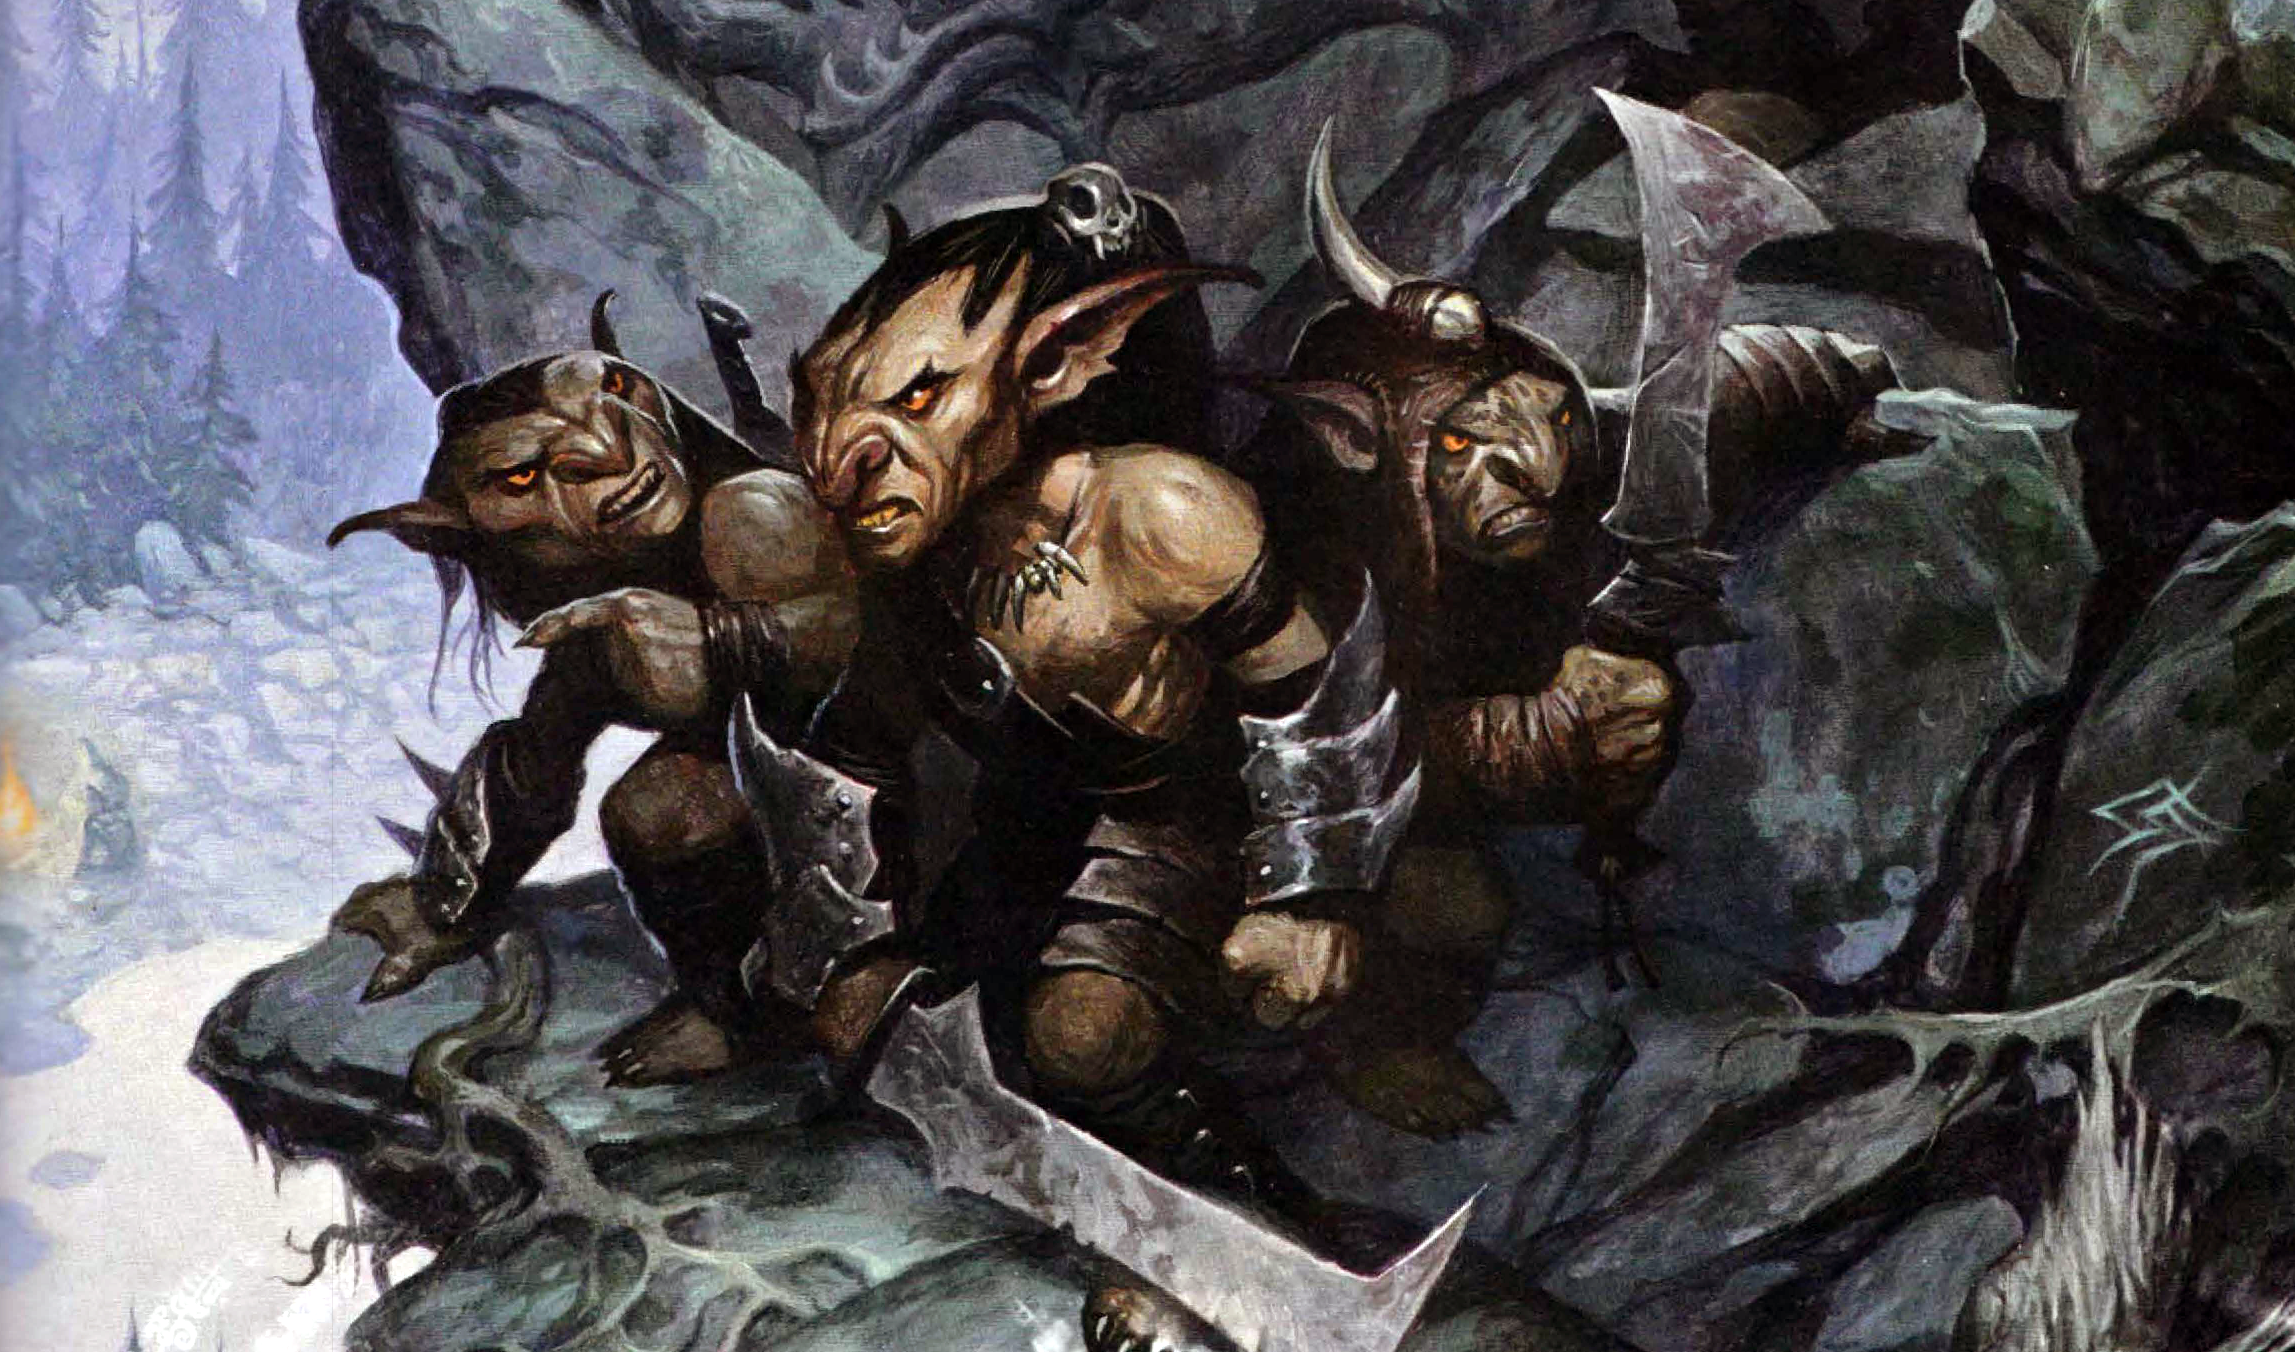 Goblins of the Dripping Caves - Storm King's Thunder (Wizards of the Coast)